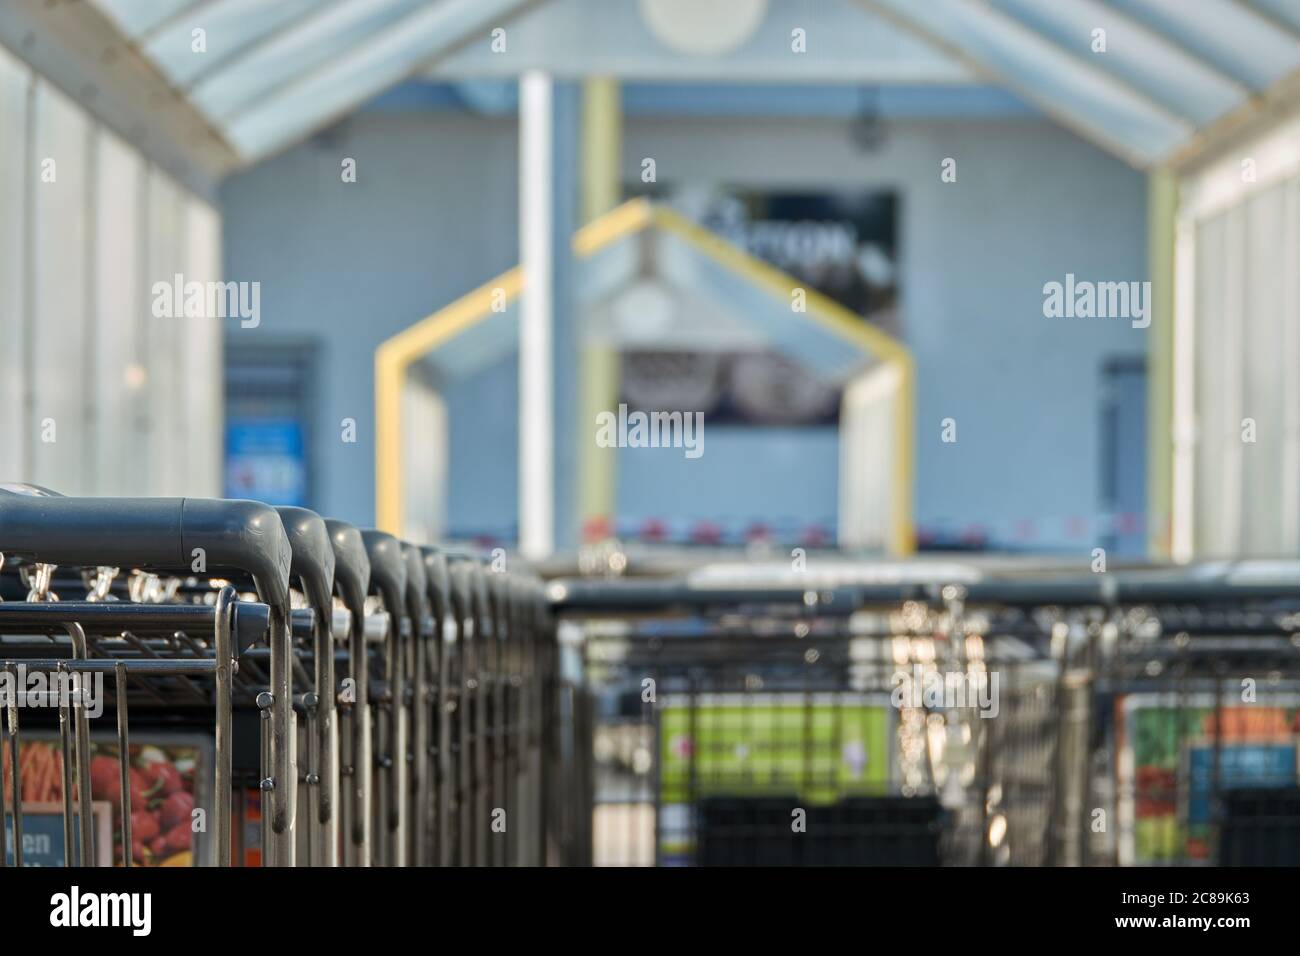 Shopping carts are in the row, depth of field. Goeppingen. Stock Photo